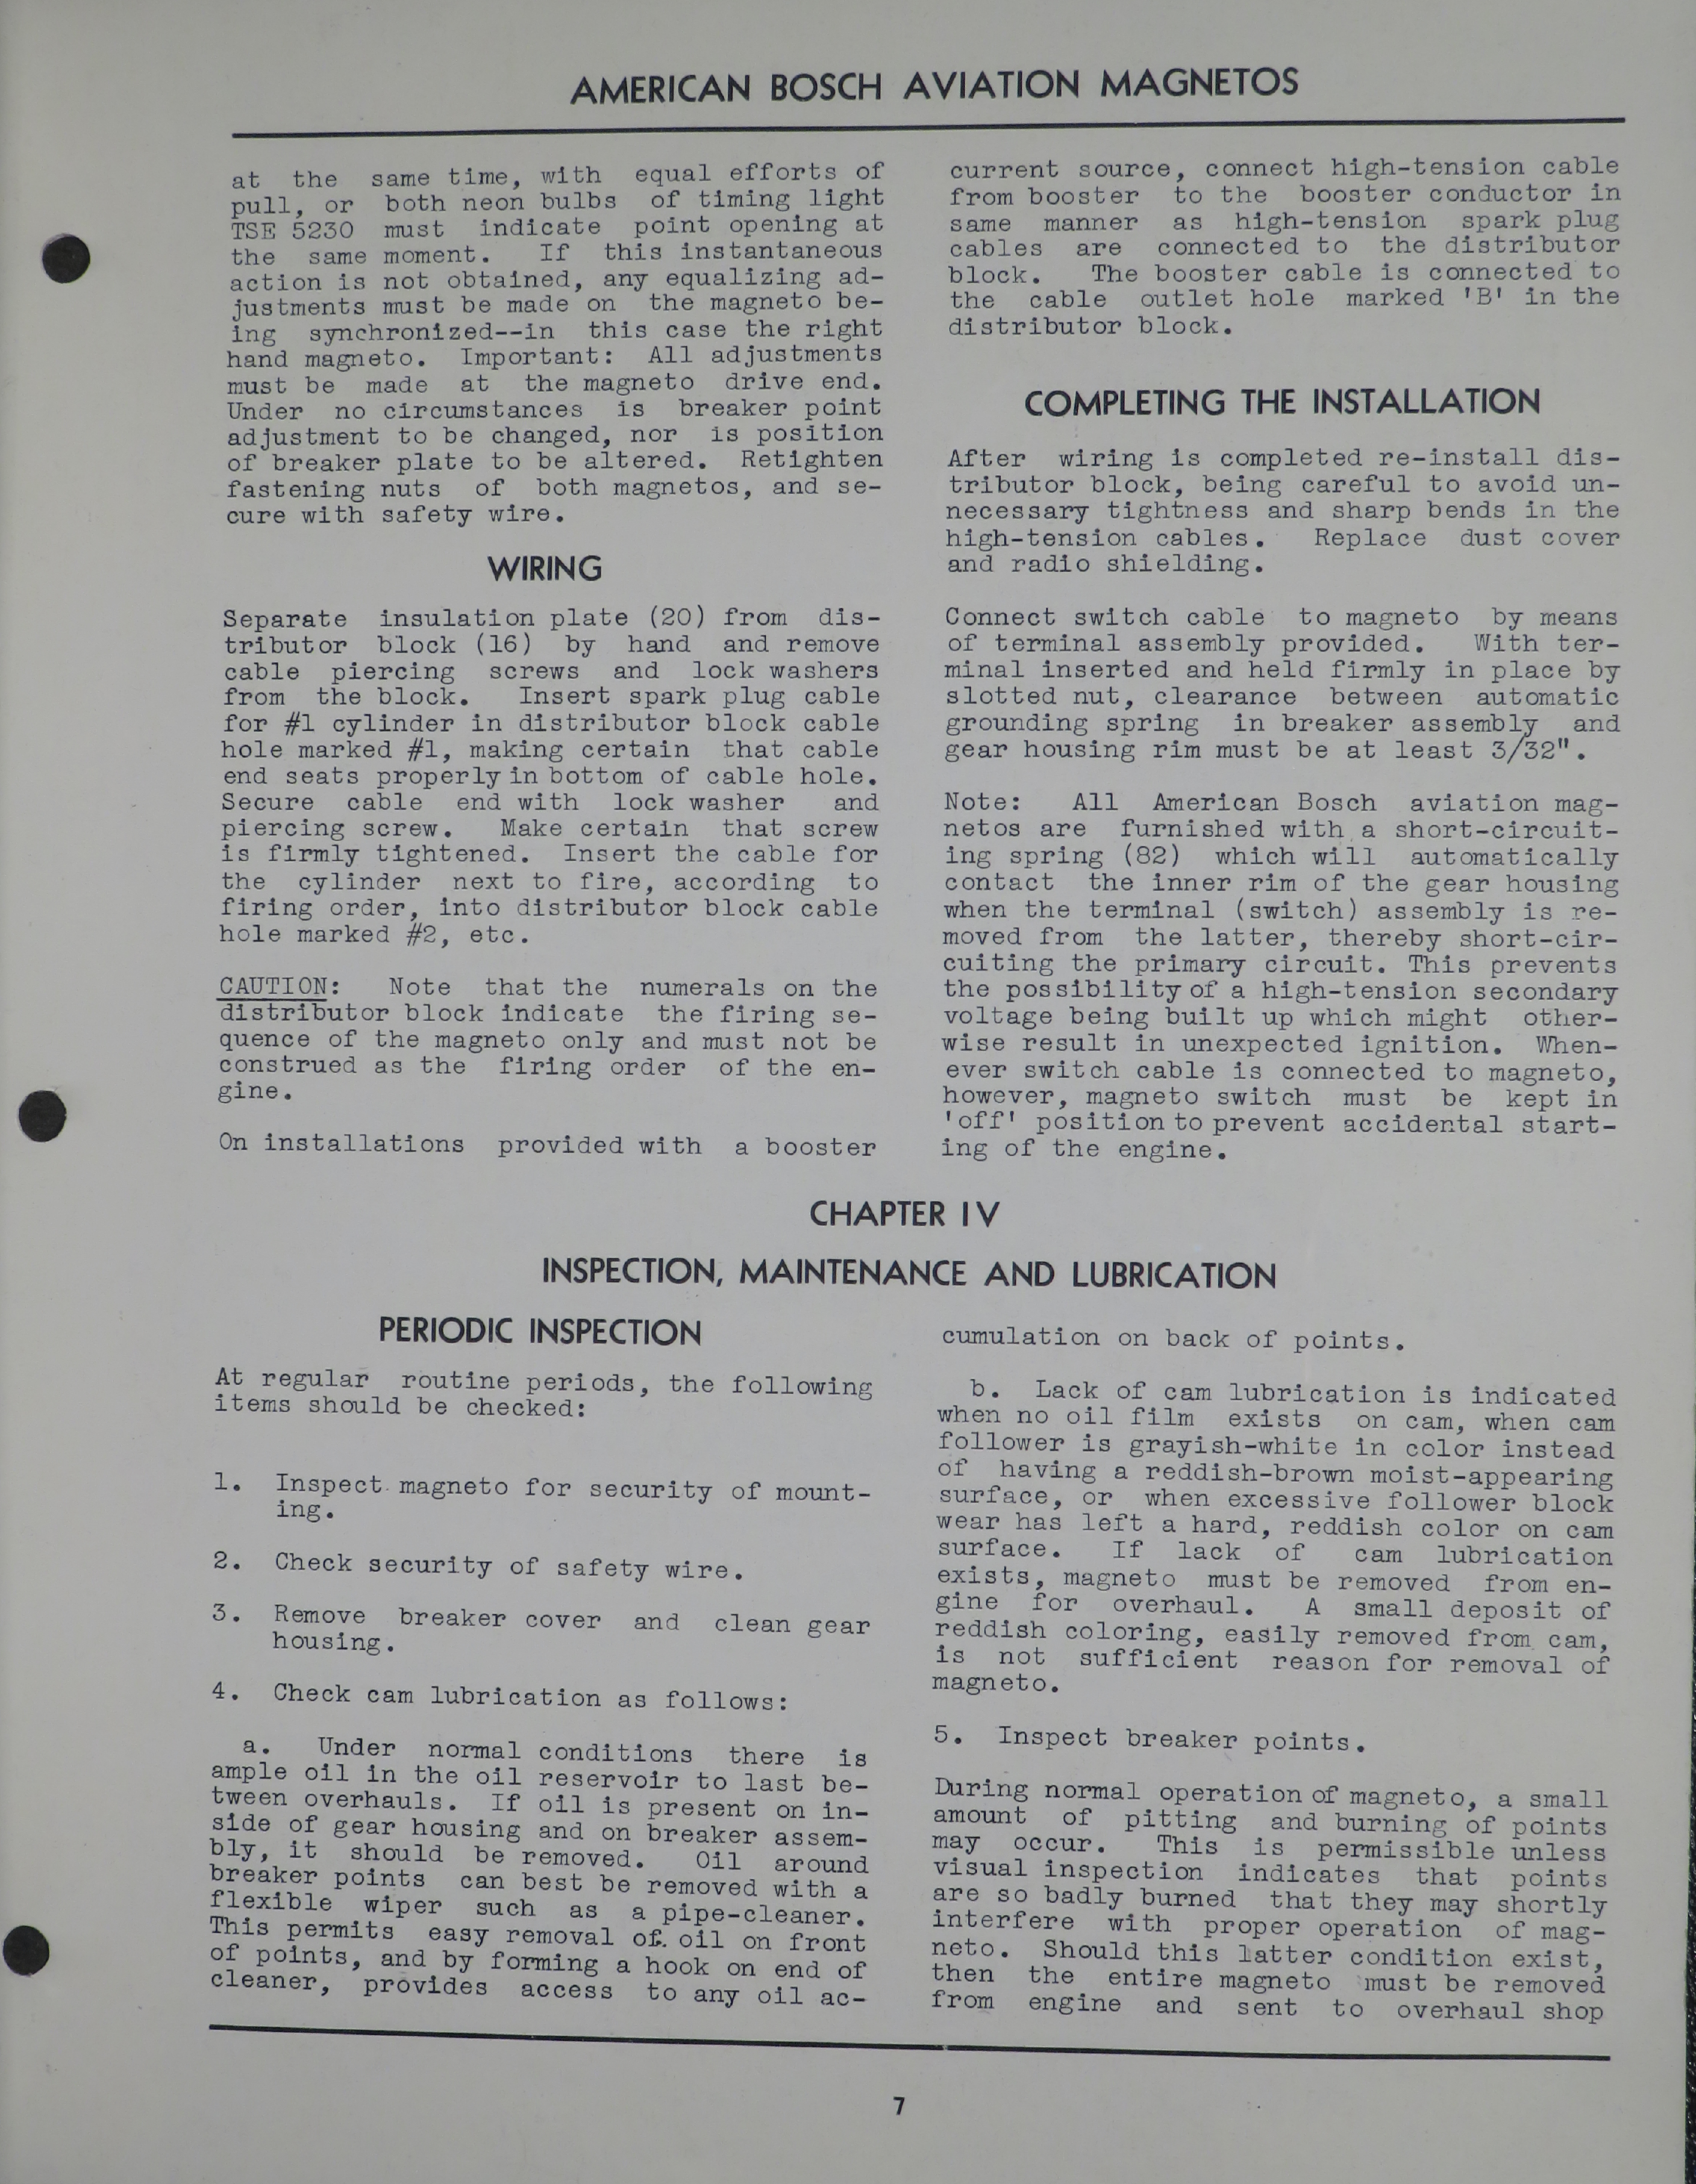 Sample page 7 from AirCorps Library document: Service Instructions for American Bosch Aviation Magnetos - Types SF14LU-7 and SF14LC-7